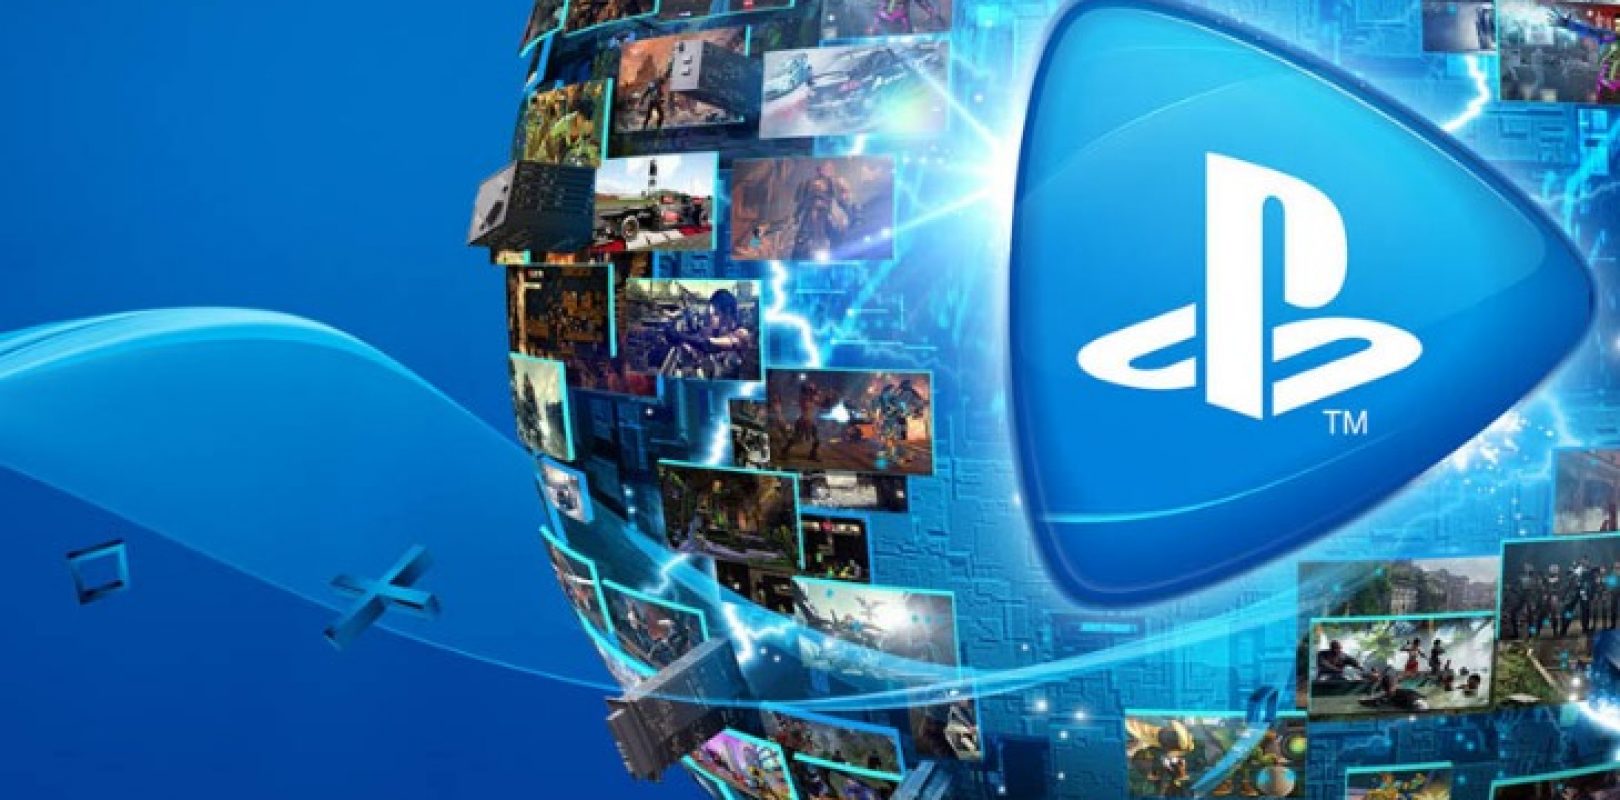 PS Now Has a Respectable 3.2 Million Subscribers